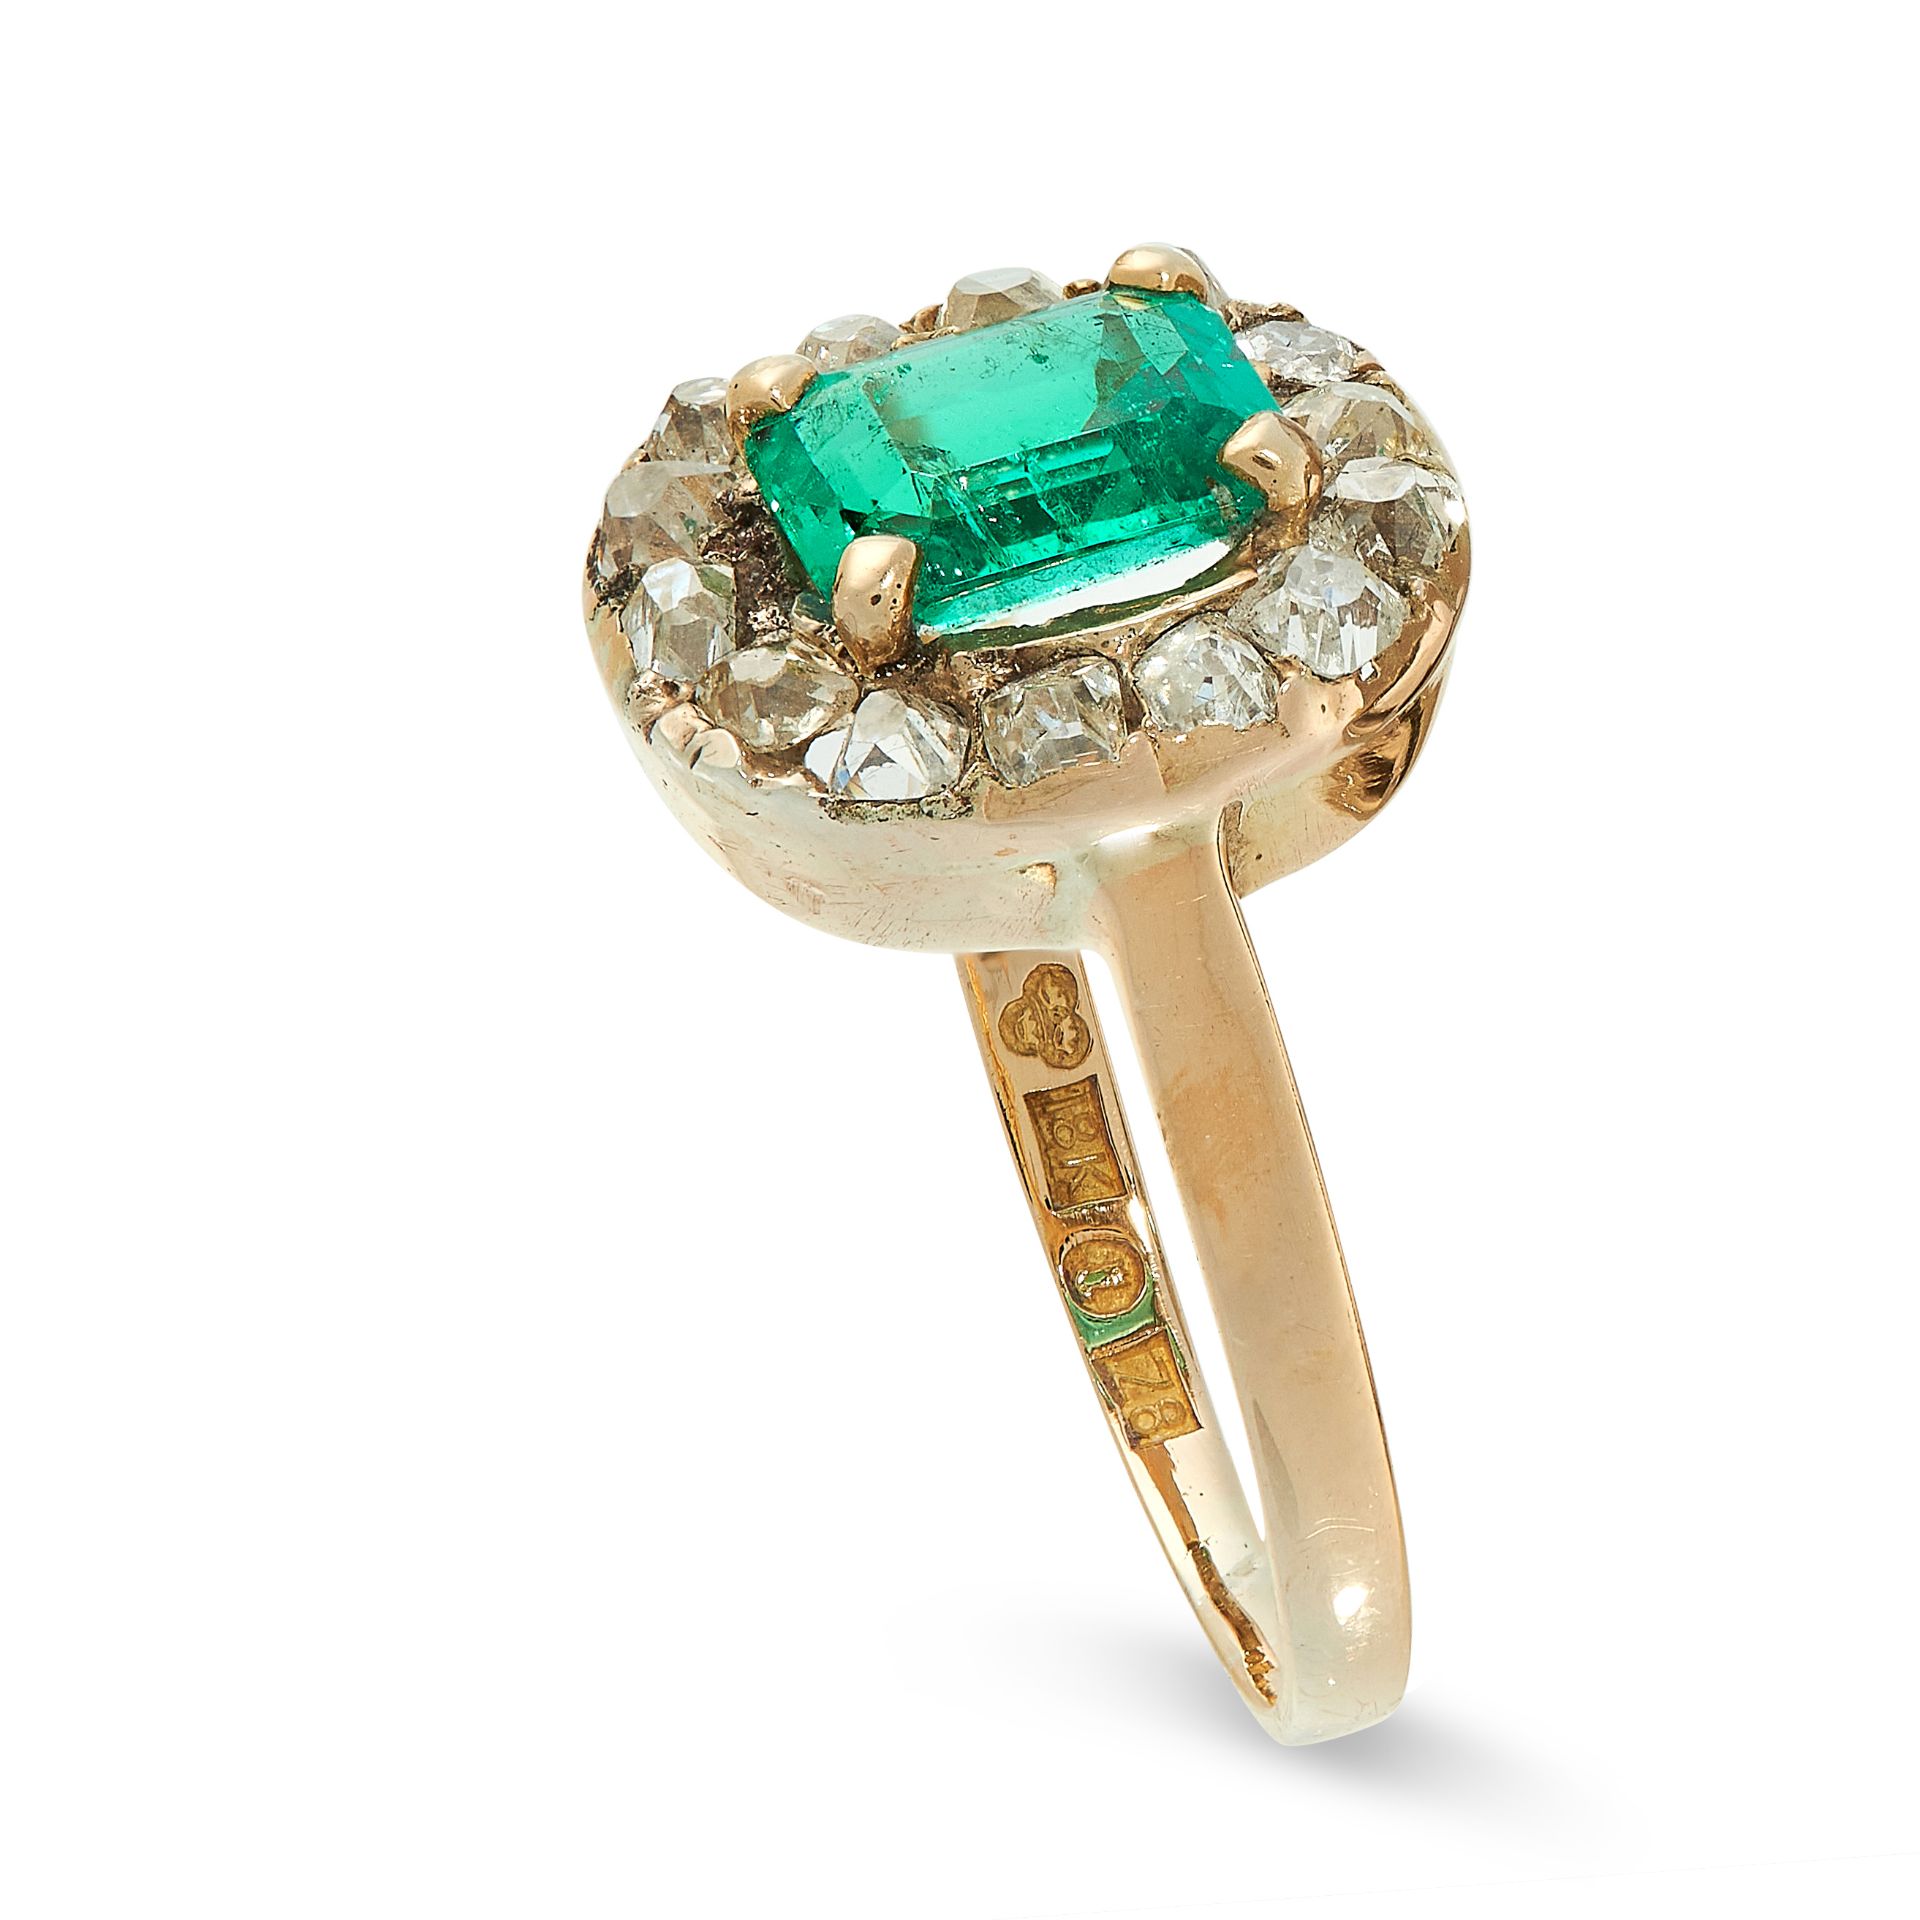 EMERALD AND DIAMOND RING of cluster design, set with a step-cut emerald estimated to weigh - Image 2 of 2